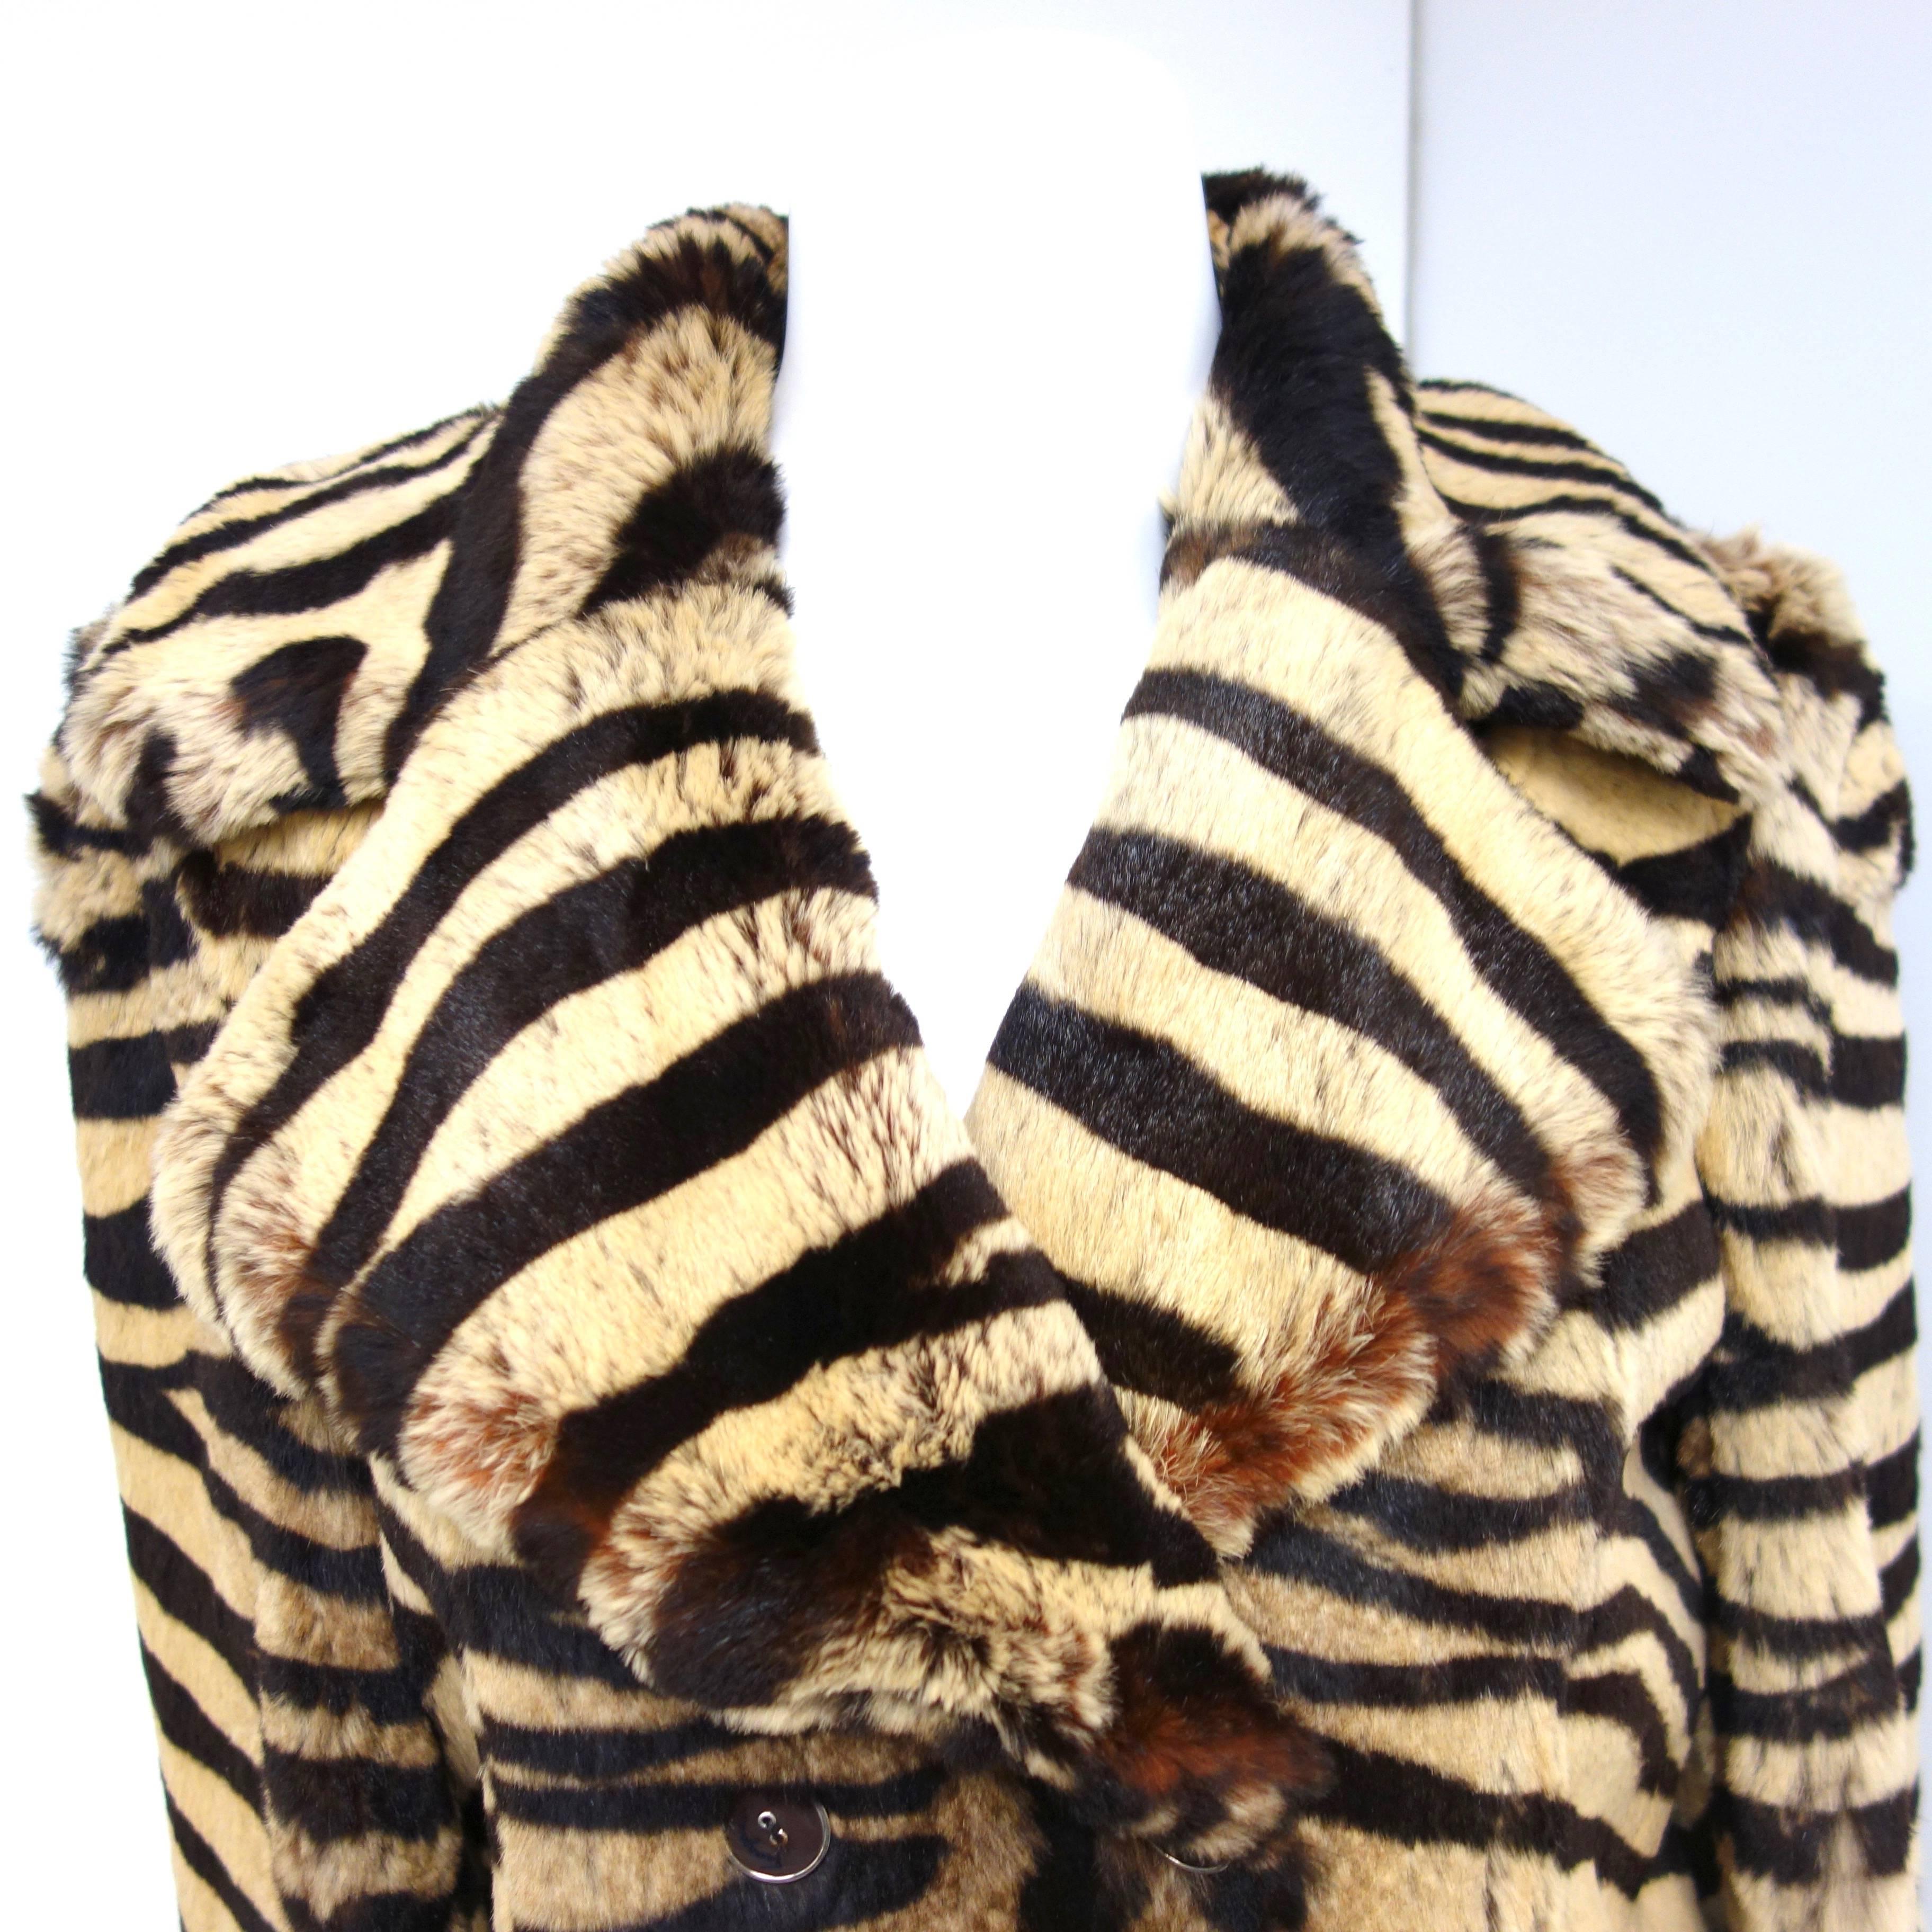 Gorgous tiger print lapin fur 3/4 length, double breasted coat from Salvatore Ferragamo. Large notched collars, leather trimming around the two side pockets, leather and silk lining and signed buttons enhance the beauty of this coat. 
Size stated